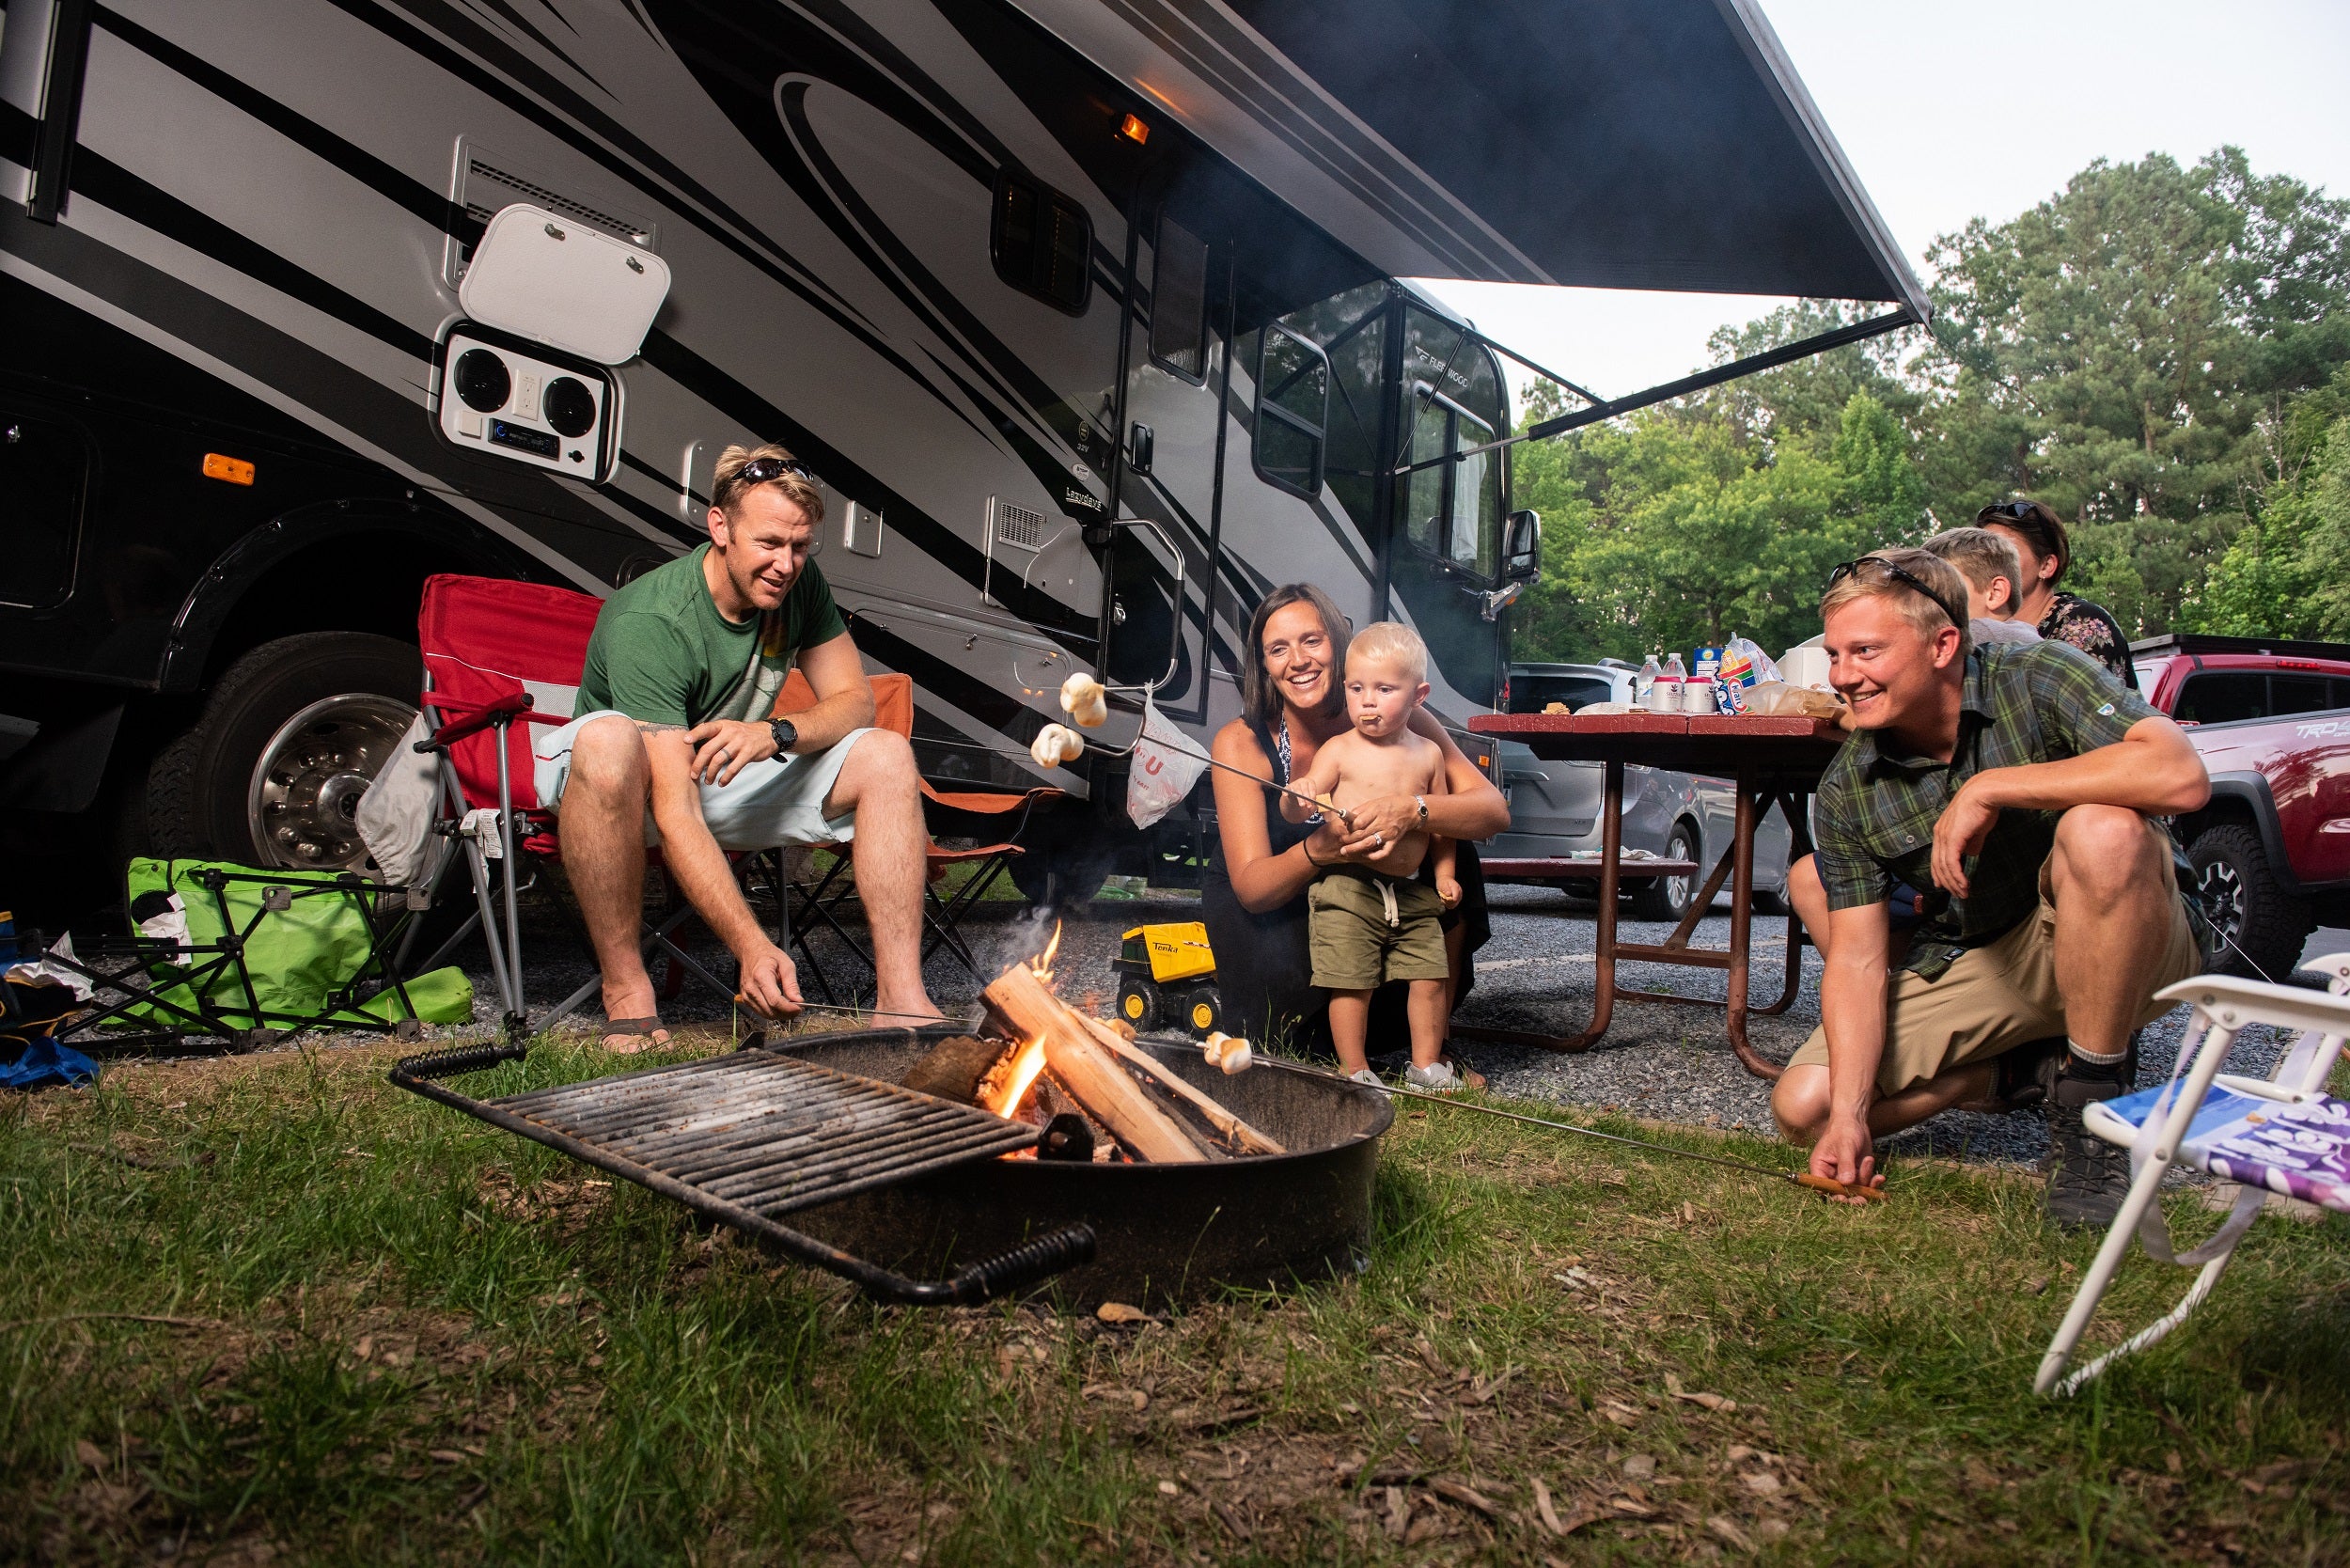 A family enjoying one of our standard, back-in RV sites.